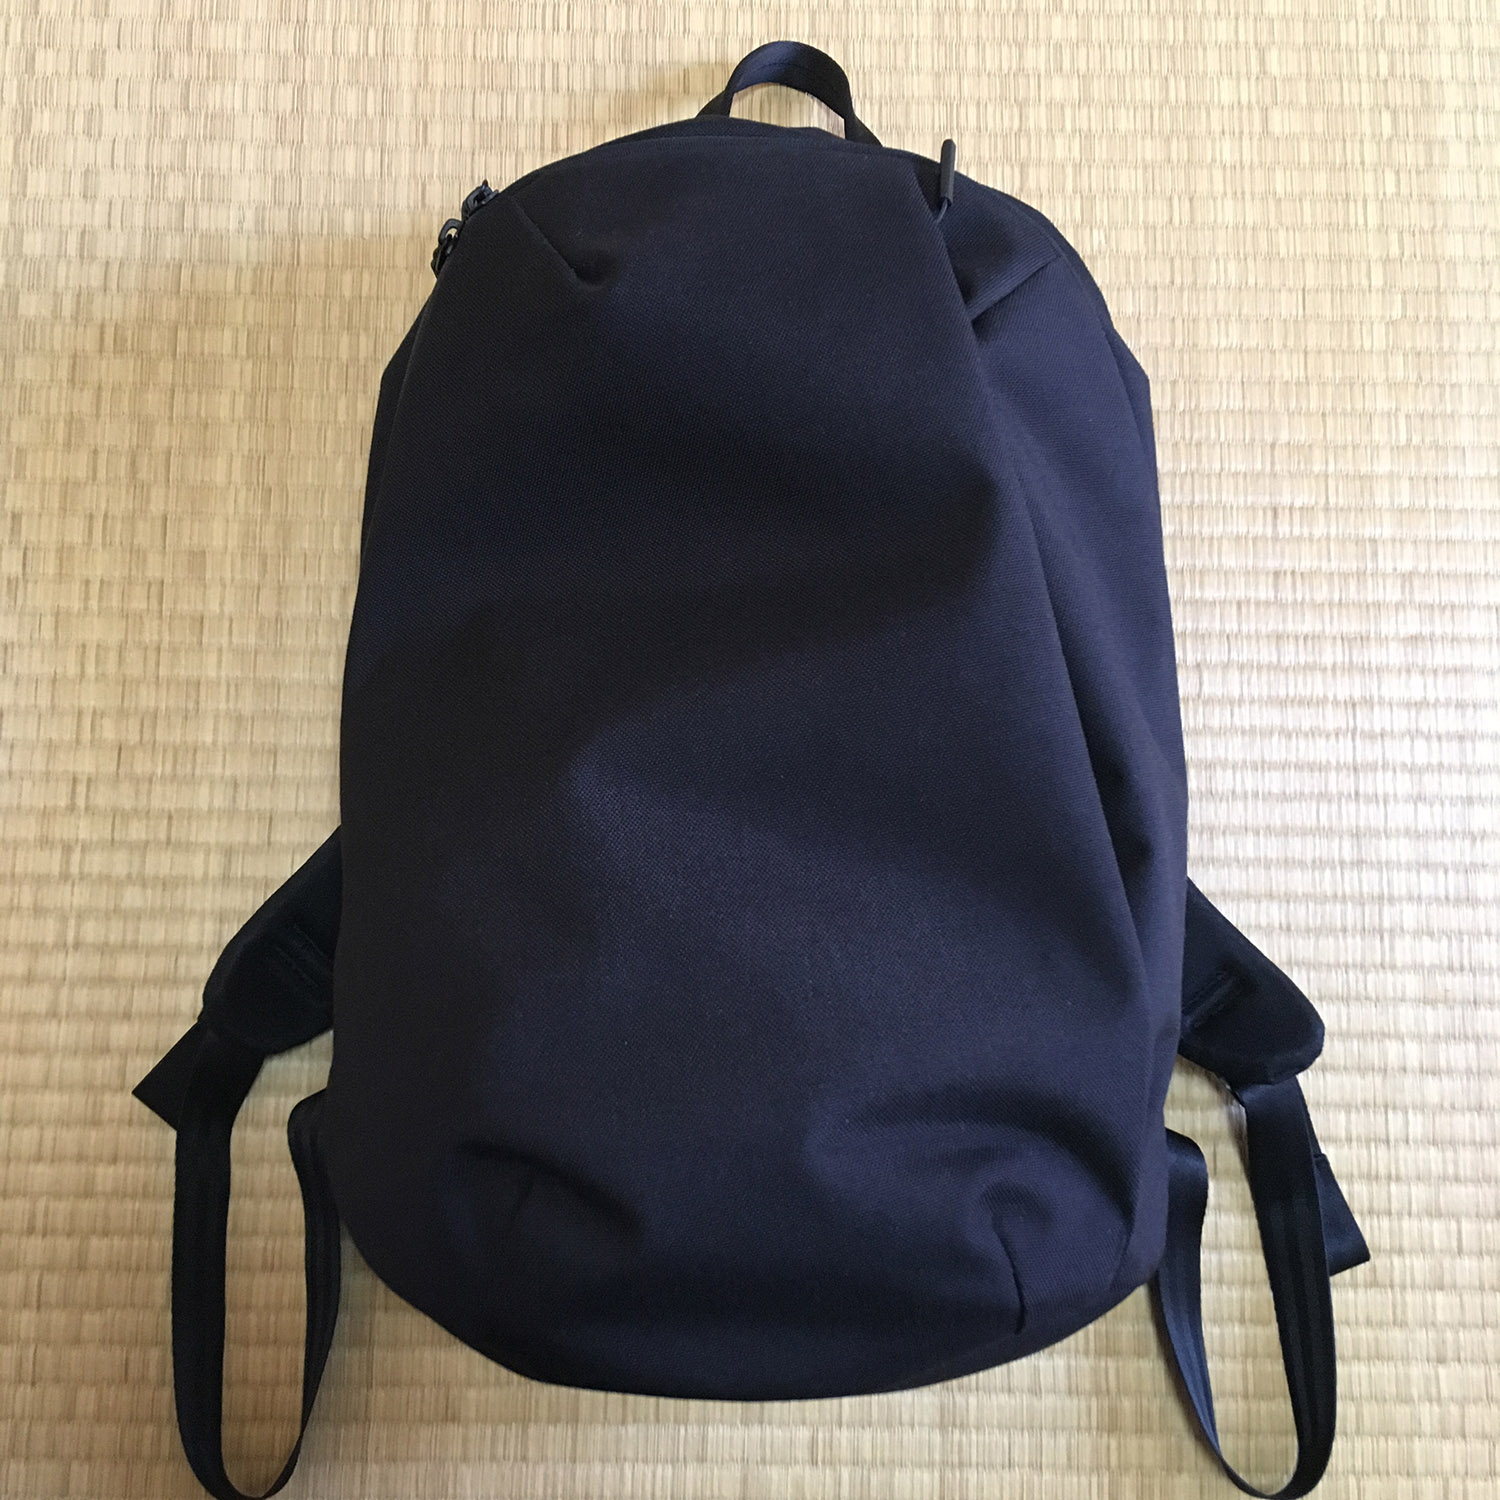 WEXLEY STEM BACKPACK を購入した！【レビュー】 | PING SONG YOU